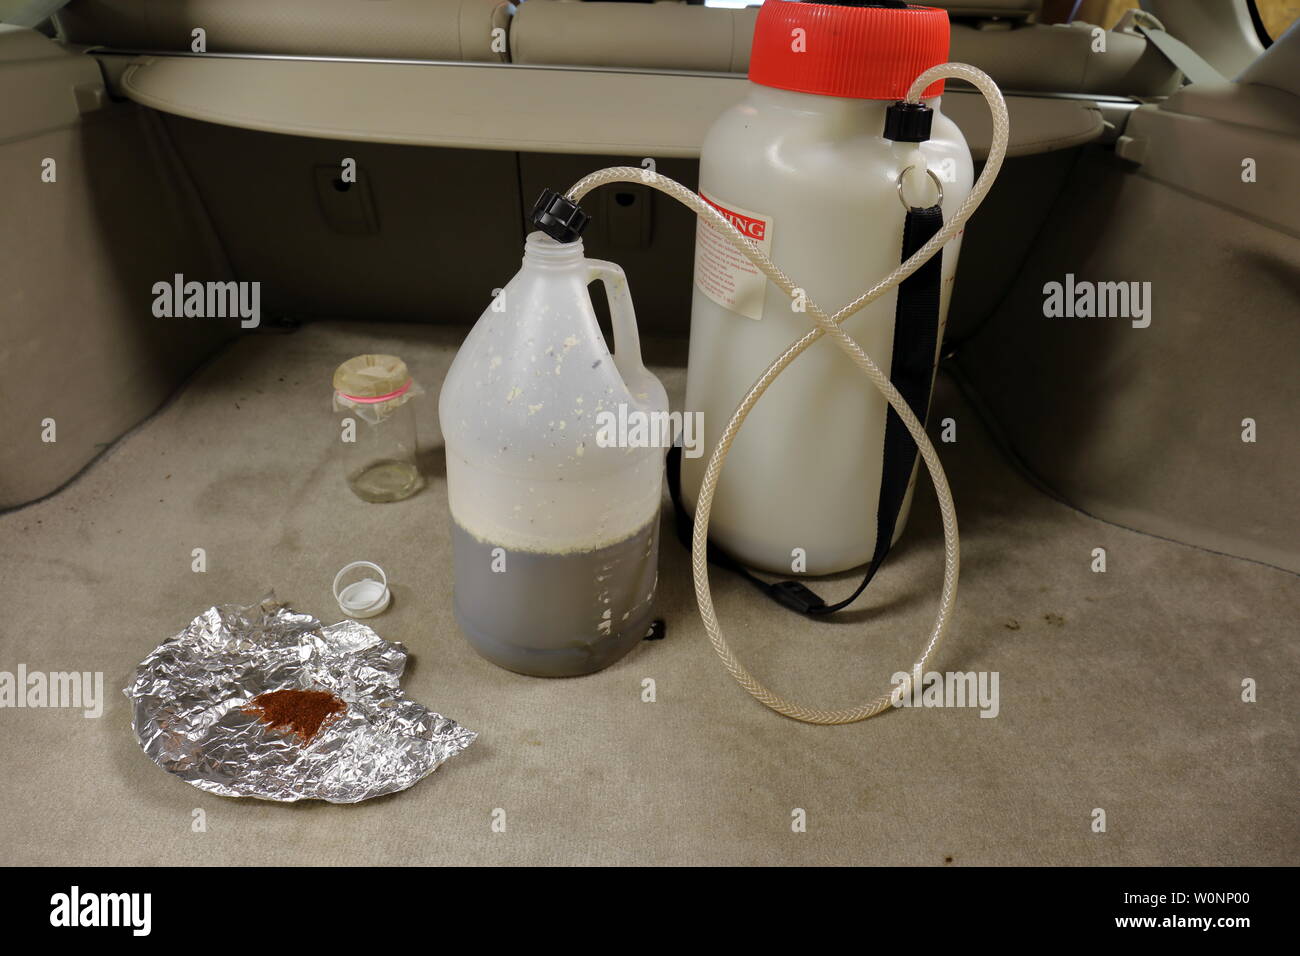 Supplies and chemicals used to manufacture methamphetamine in the back of a vehicle Stock Photo